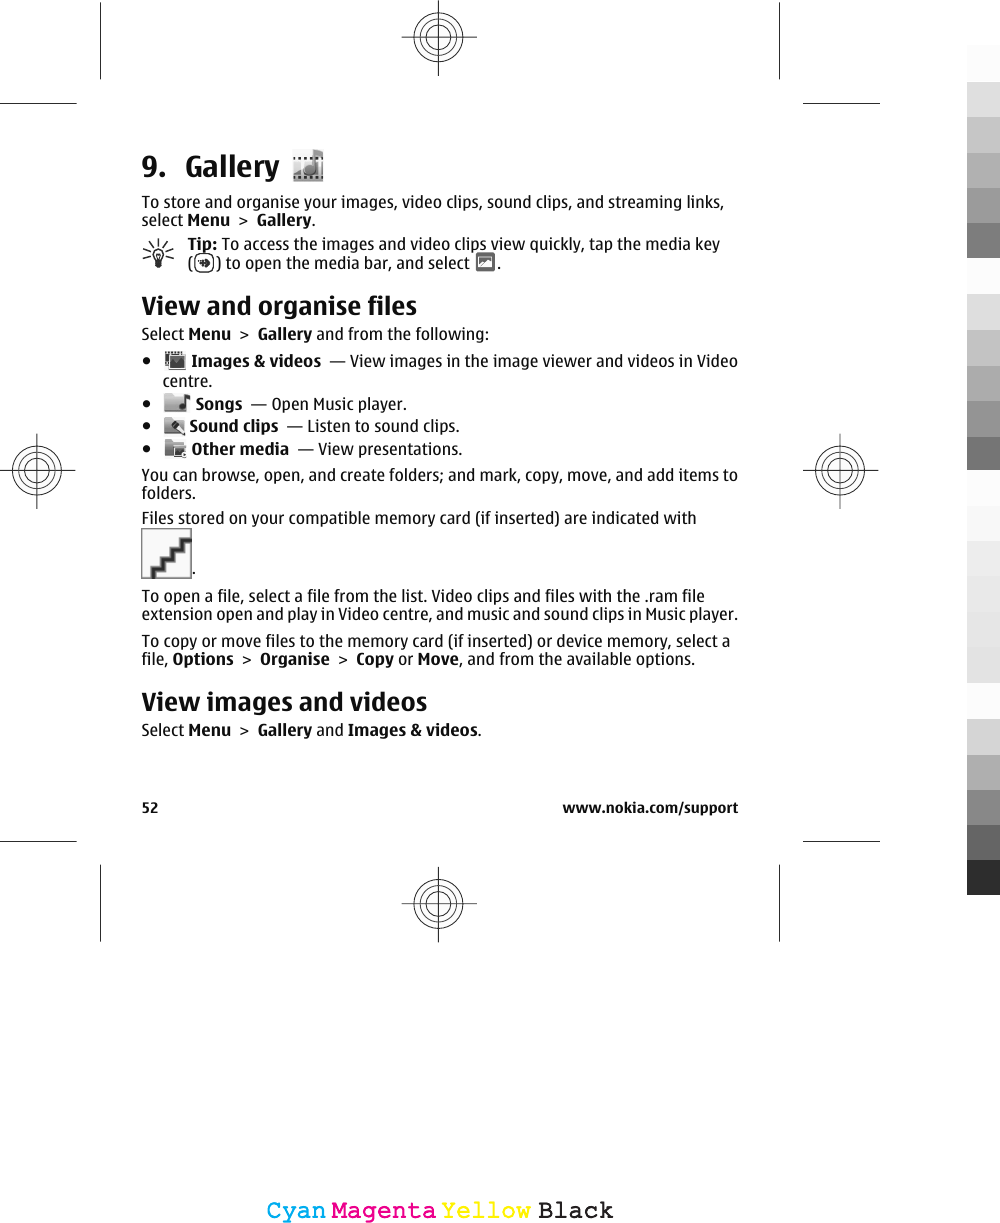 9. GalleryTo store and organise your images, video clips, sound clips, and streaming links,select Menu &gt; Gallery.Tip: To access the images and video clips view quickly, tap the media key() to open the media bar, and select  .View and organise filesSelect Menu &gt; Gallery and from the following:● Images &amp; videos  — View images in the image viewer and videos in Videocentre.● Songs  — Open Music player.● Sound clips  — Listen to sound clips.● Other media  — View presentations.You can browse, open, and create folders; and mark, copy, move, and add items tofolders.Files stored on your compatible memory card (if inserted) are indicated with.To open a file, select a file from the list. Video clips and files with the .ram fileextension open and play in Video centre, and music and sound clips in Music player.To copy or move files to the memory card (if inserted) or device memory, select afile, Options &gt; Organise &gt; Copy or Move, and from the available options.View images and videosSelect Menu &gt; Gallery and Images &amp; videos.52 www.nokia.com/supportCyanCyanMagentaMagentaYellowYellowBlackBlack